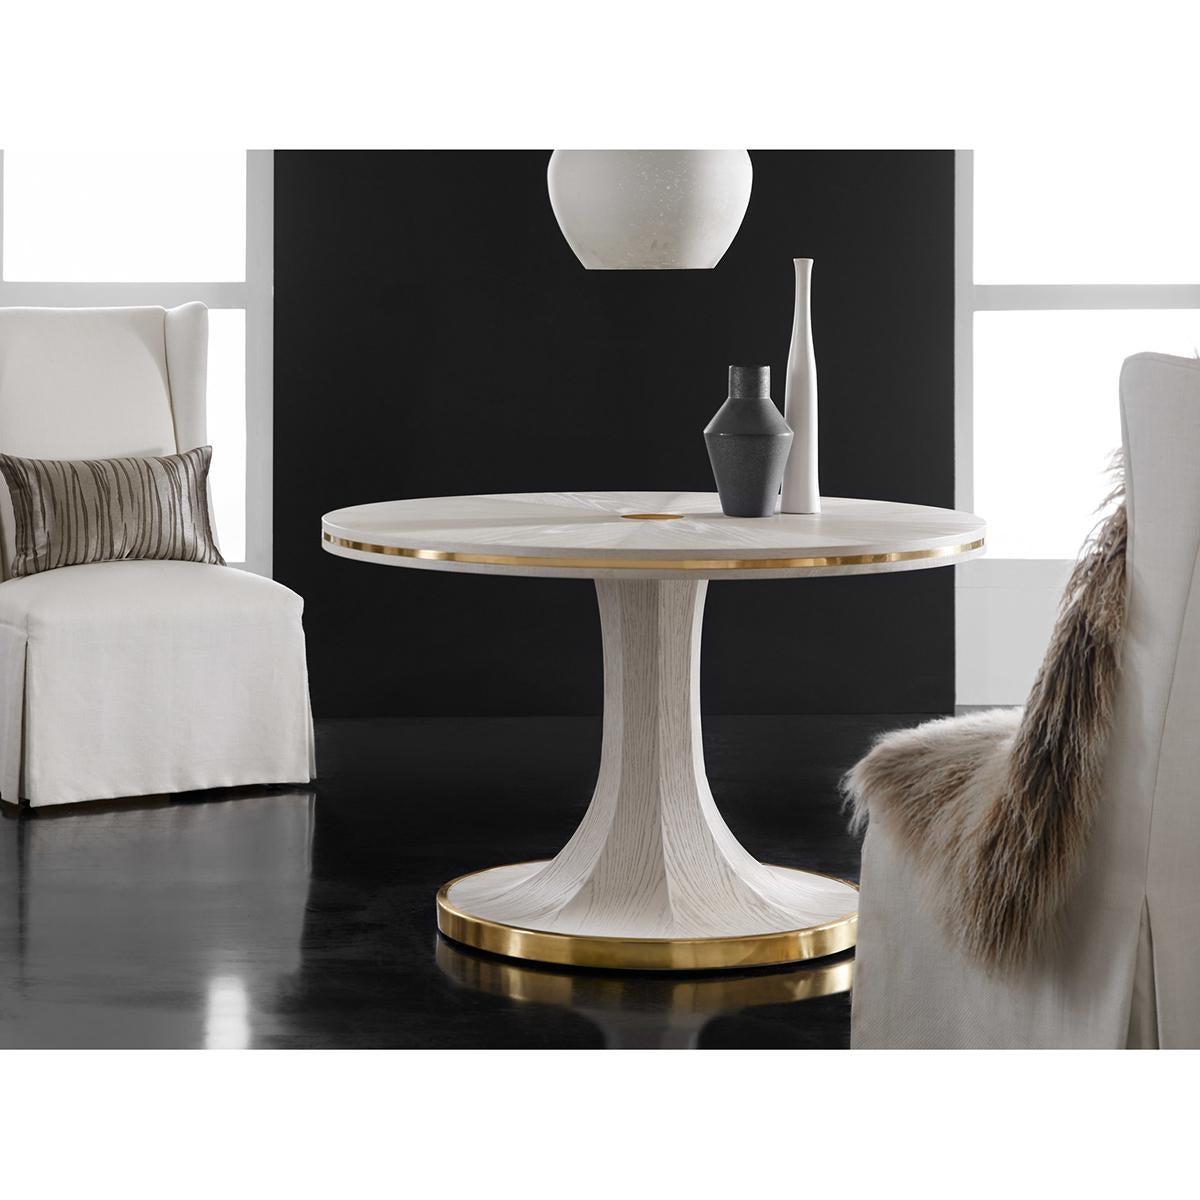 Art Deco White Center Table with white wash oak veneer. A rayed top centered by an antiqued brass round applique, with brass inlaid trim and raised on an octagonal pedestal with a round brass mounted base.

Dimensions: 48